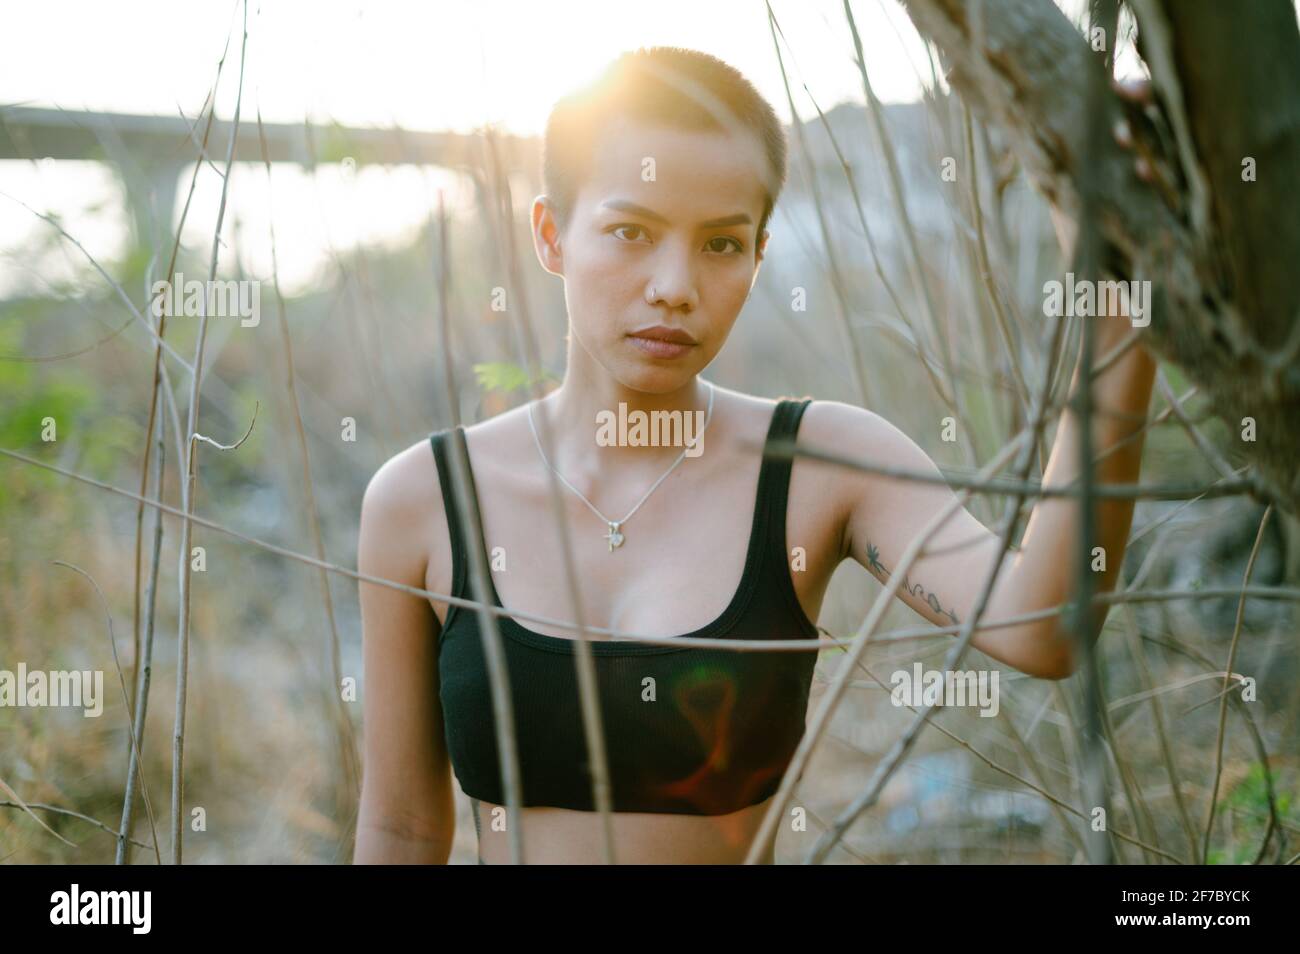 Closeup portrait of a young Asian ethnicity woman with short hair in nature, wearing a sports bra, looking at the camera. She is surrounded by bushes. Stock Photo